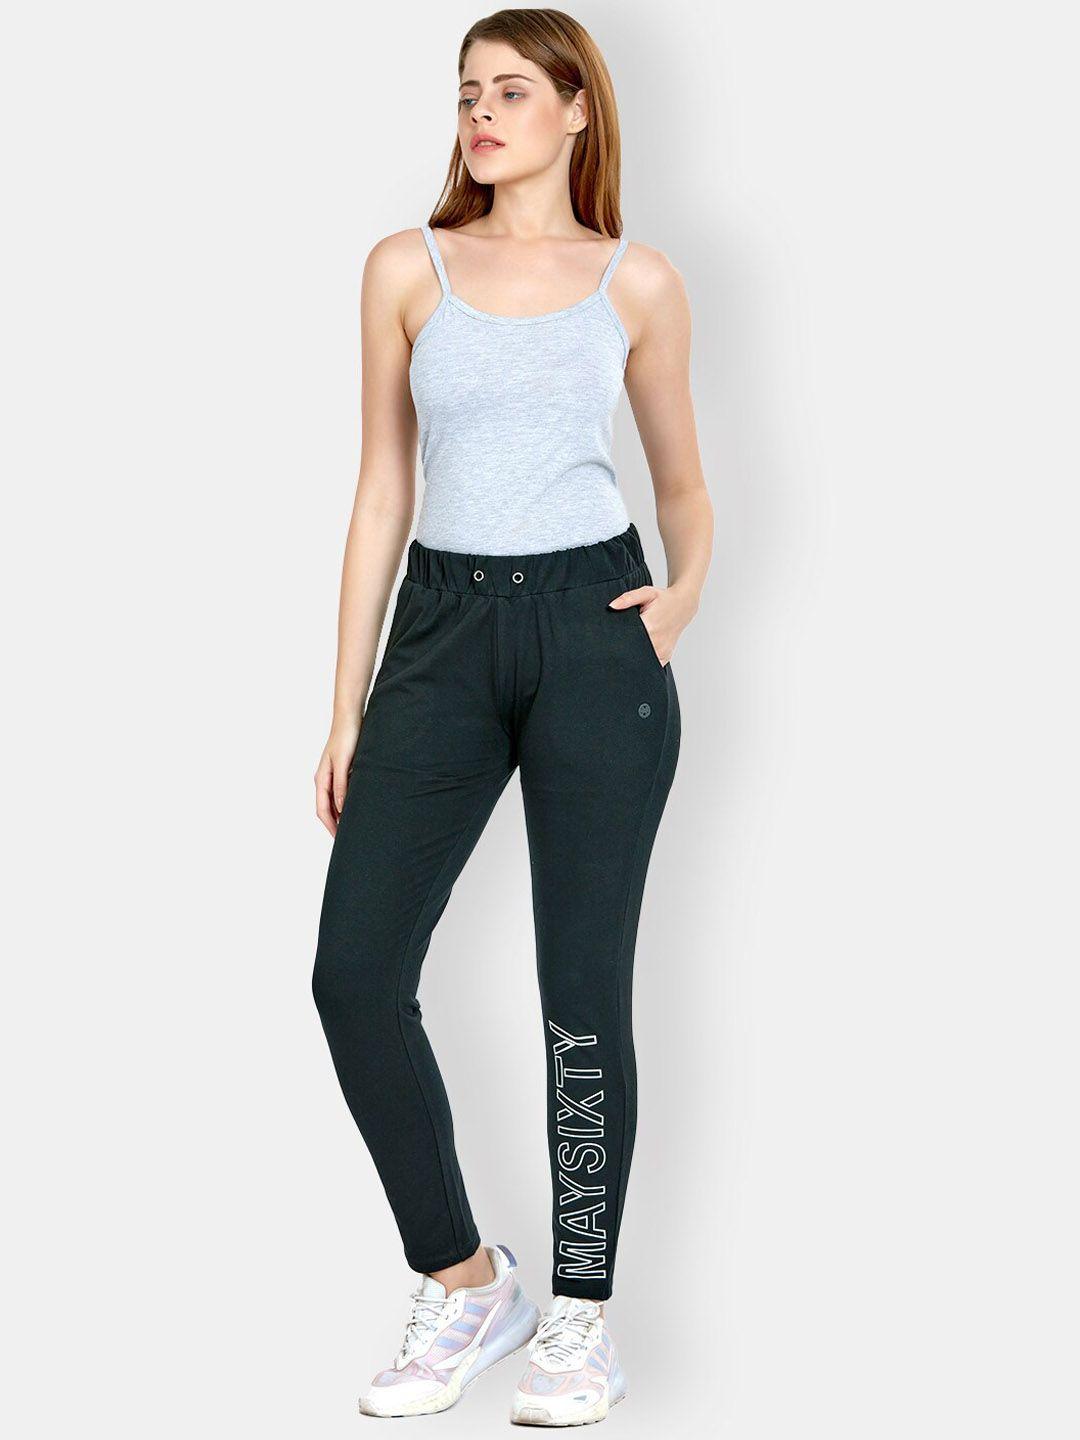 maysixty women typography printed yoga track pant